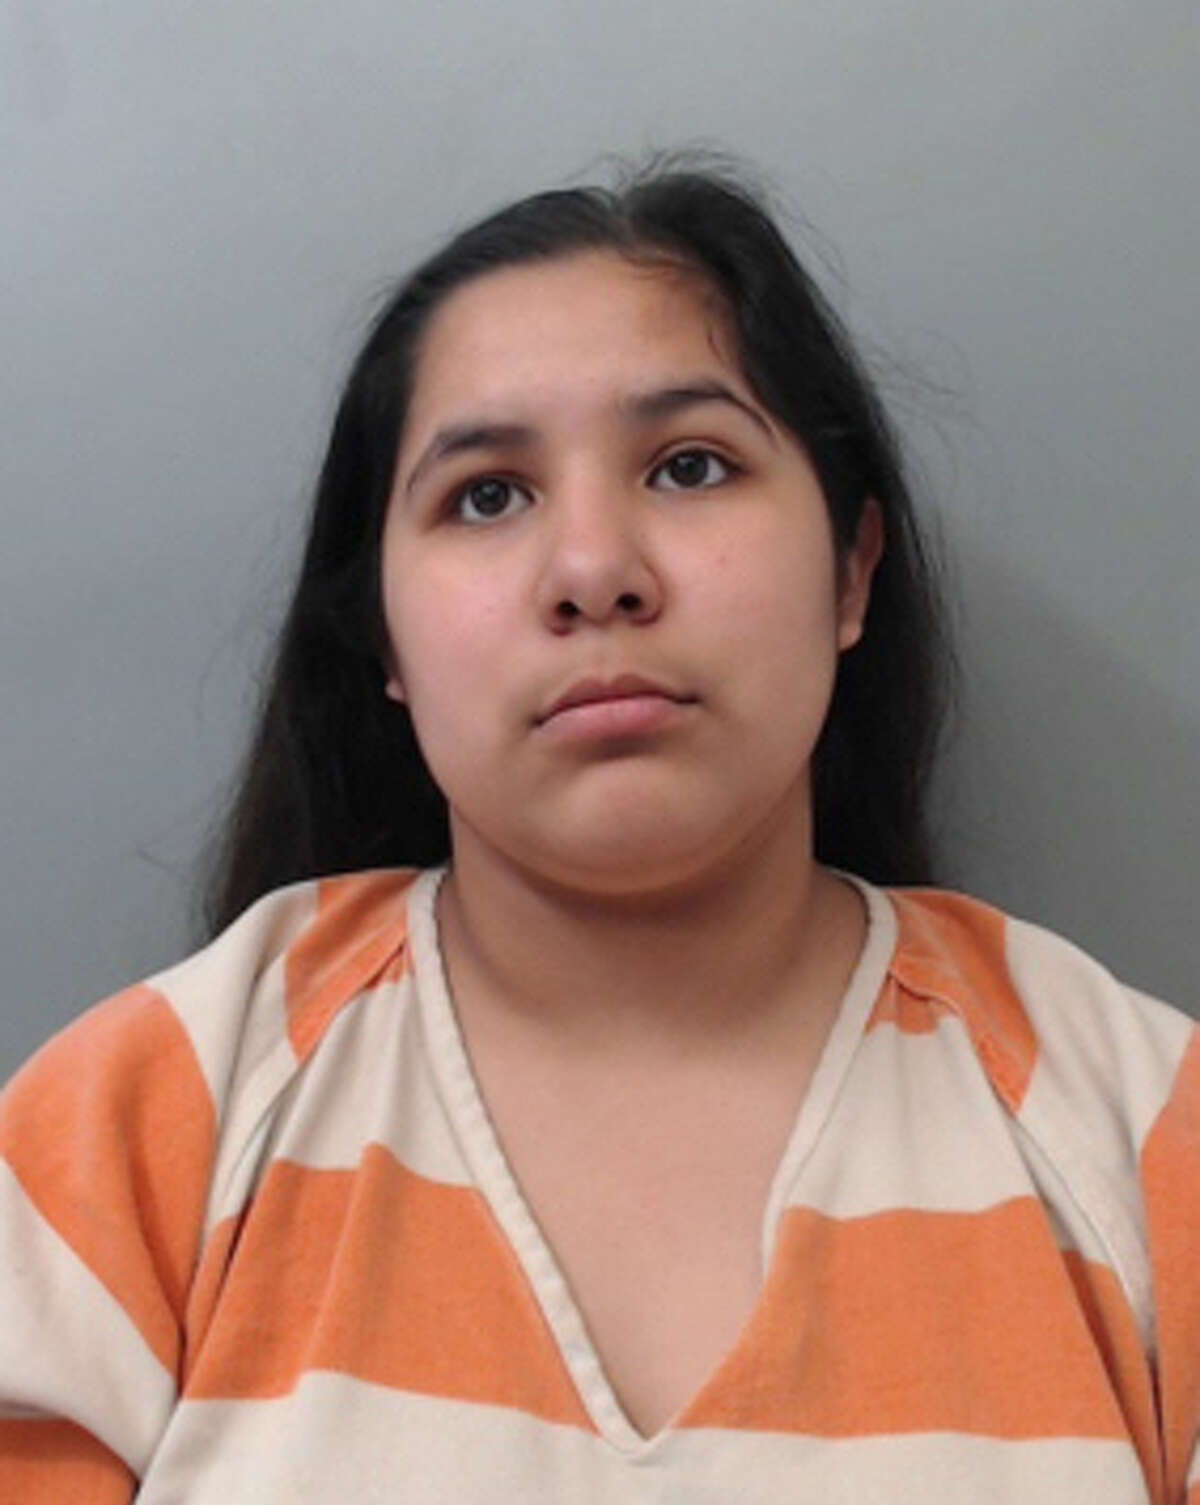 Esperanza Valdez, 18, was charged with abandoning, endangering a child and injury to a child.